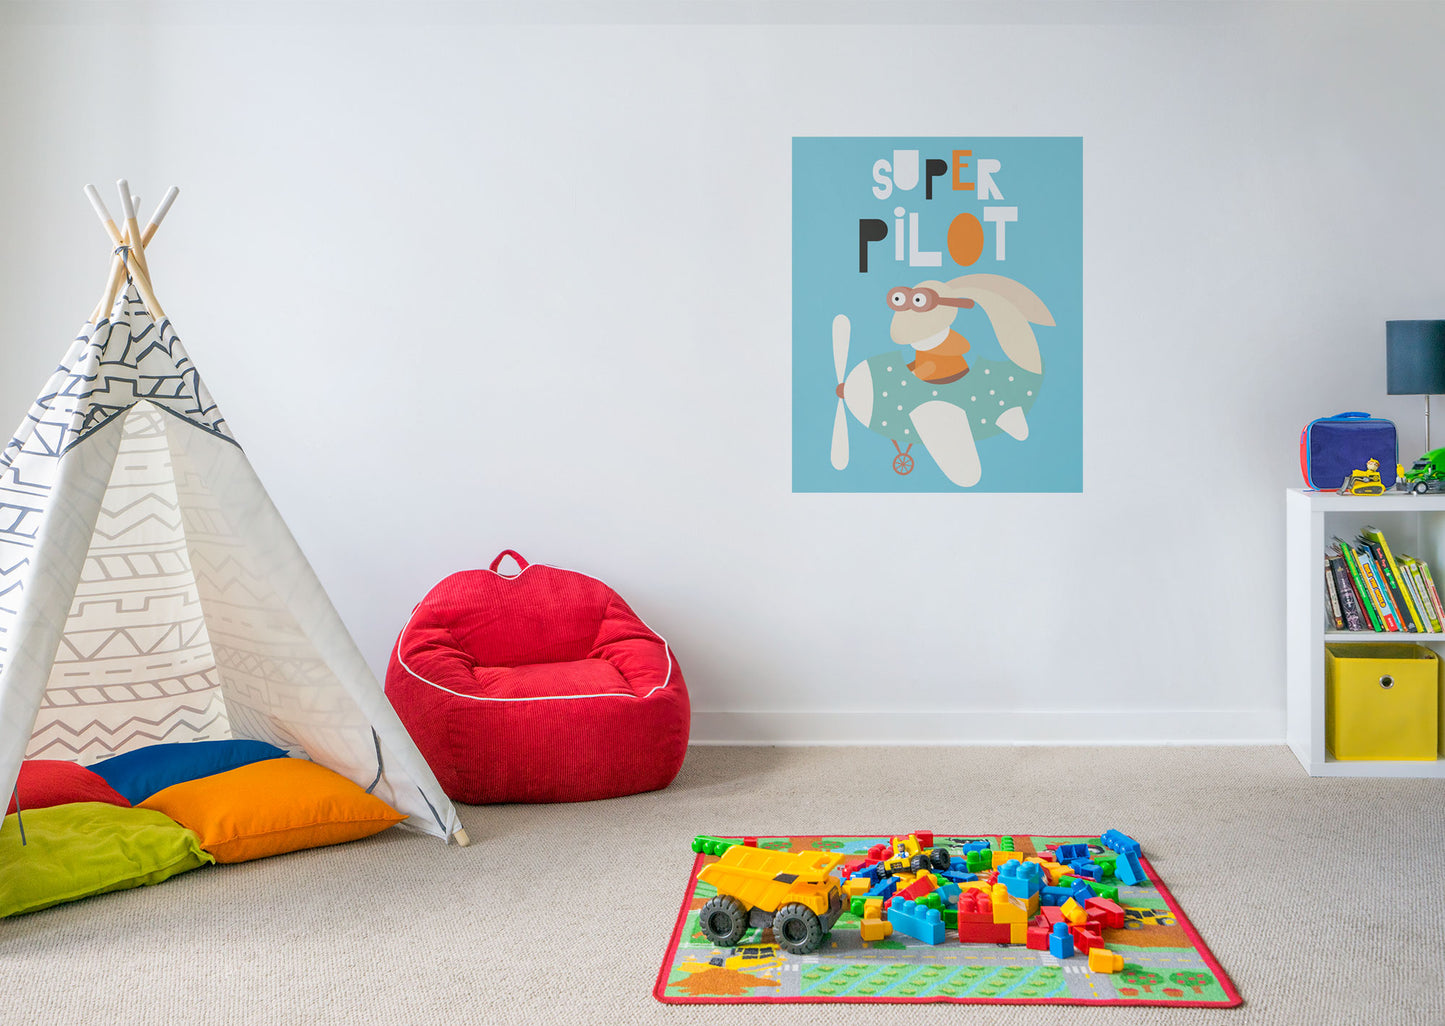 Nursery: Planes Super Pilot Mural        -   Removable Wall   Adhesive Decal